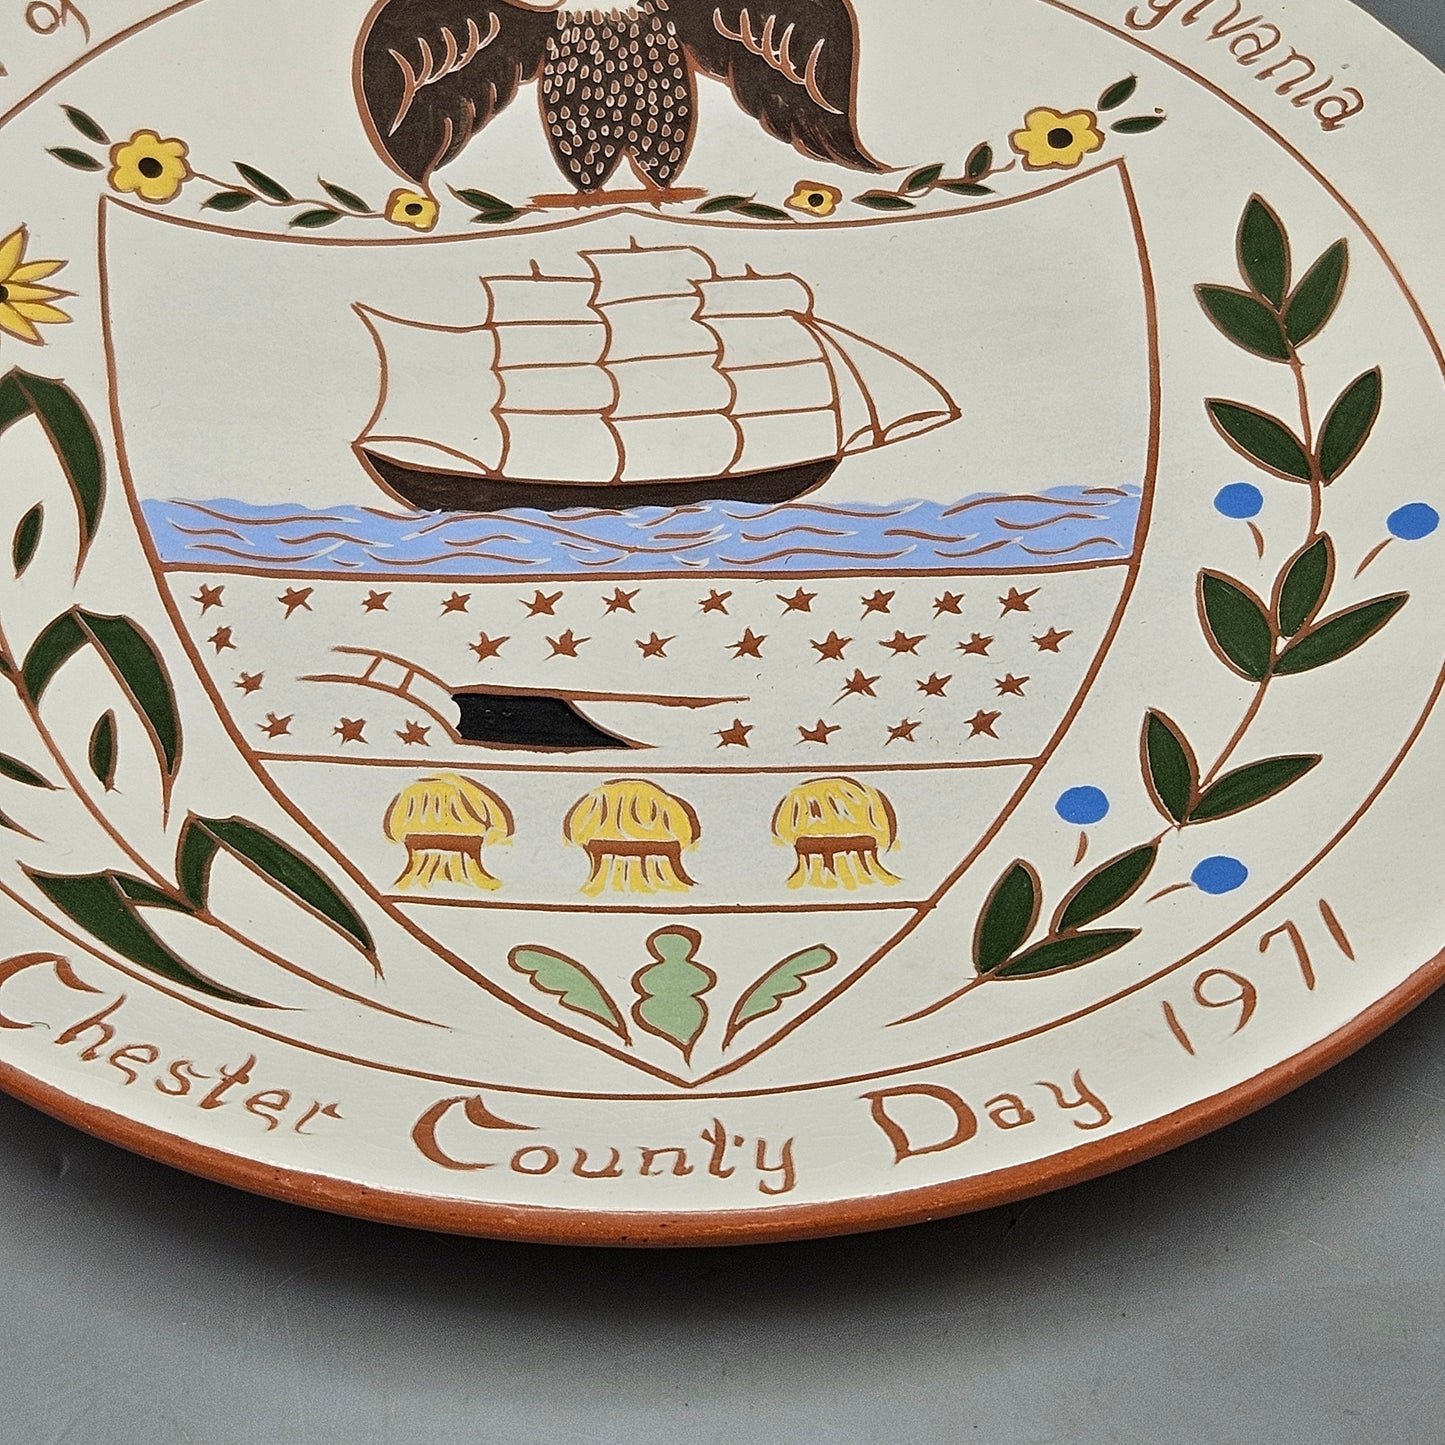 Signed Vintage Seal of Chester County Redware Pottery Plate by M.L. Shelley